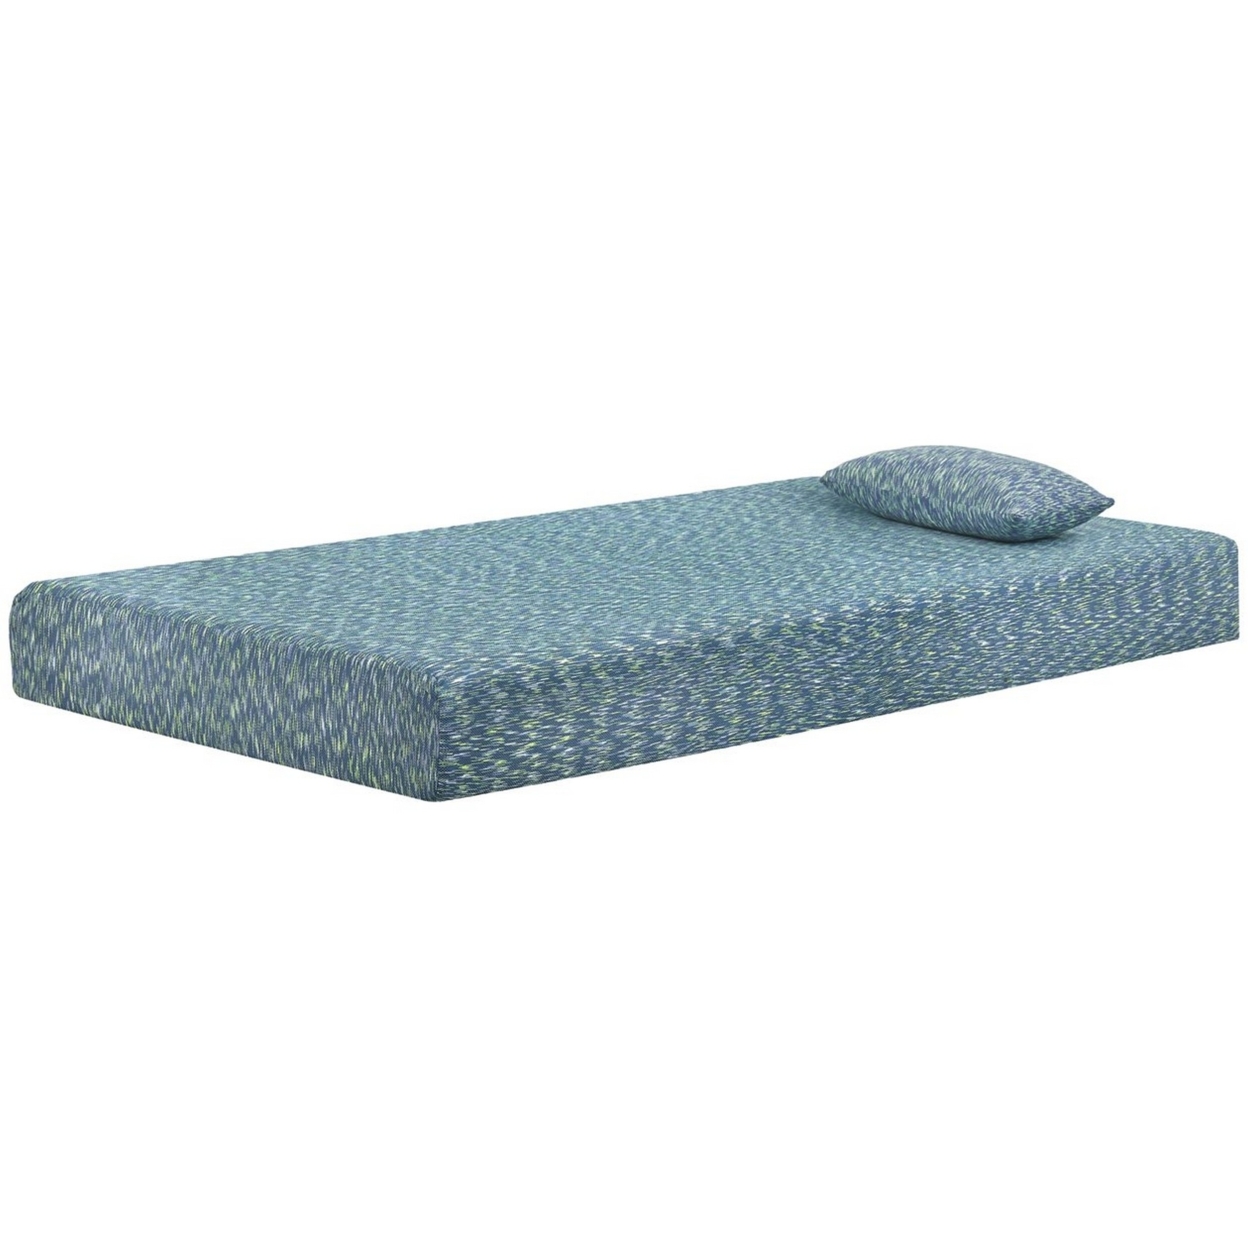 Twin Size Mattress With Hyperstretch Knit Cover And Pillow, Blue- Saltoro Sherpi